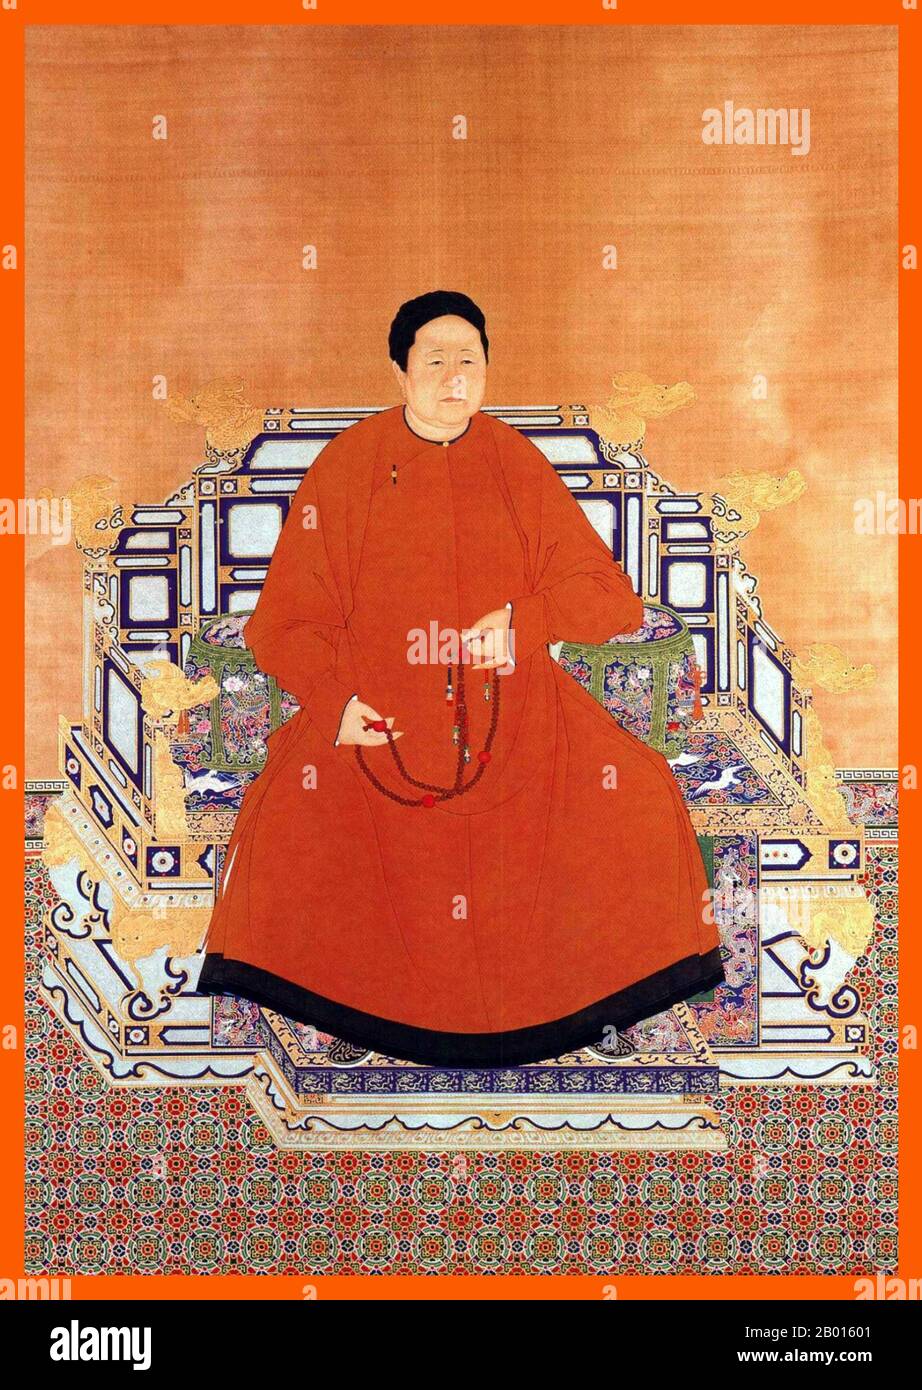 China: Empress Xiao Zhuang (March 28, 1613 - January 27, 1688), Grand Empress Dowager and descendant of Genghis Khan's family. Hanging scroll painting, 17th century.  The Empress Xiaozhuang, born Borjigit Bumbutai and honoured for most of her life by the title 'Grand Empress Dowager', was the concubine and consort of Emperor Huang Taiji, the mother of the Shunzhi Emperor and the grandmother of the Kangxi Emperor during the Qing Dynasty. She wielded significant influence over the imperial court during the rule of her son and grandson, and was known for her wisdom and political ability. Stock Photo